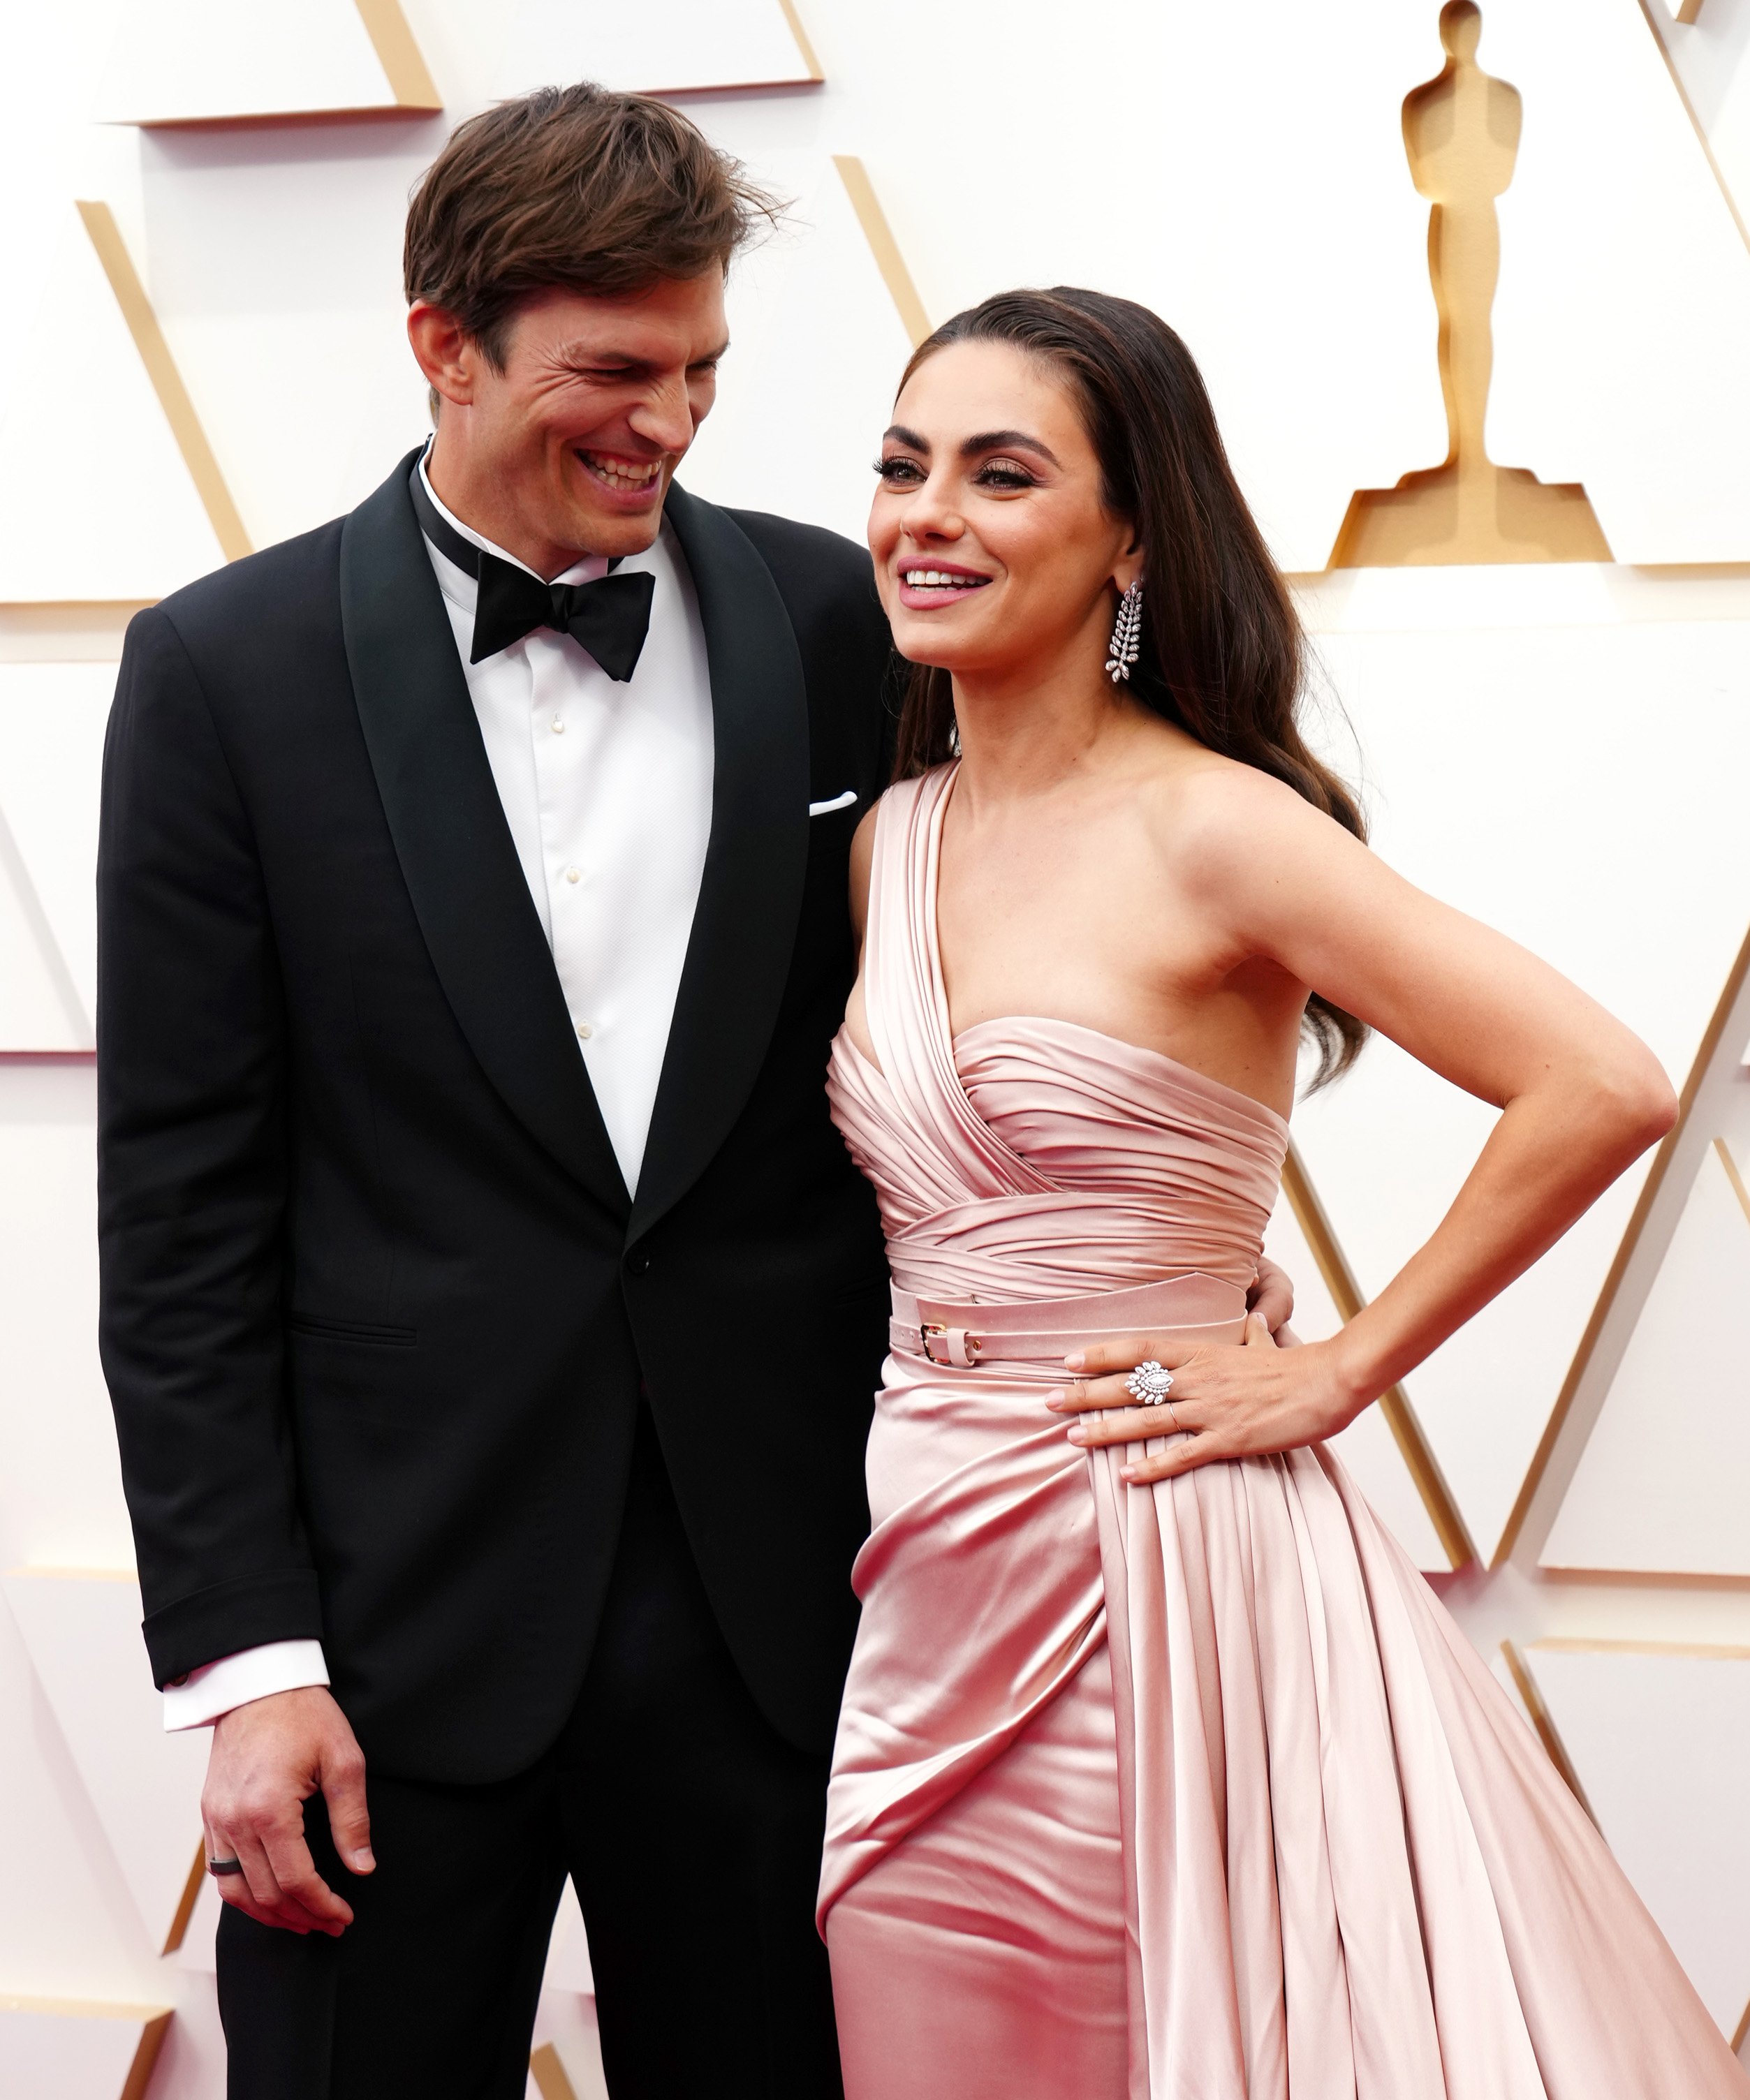 Ashton Kutcher and Mila Kunis at the 94th Annual Academy Awards on March 27, 2022 in Hollywood. | Source: Getty Images